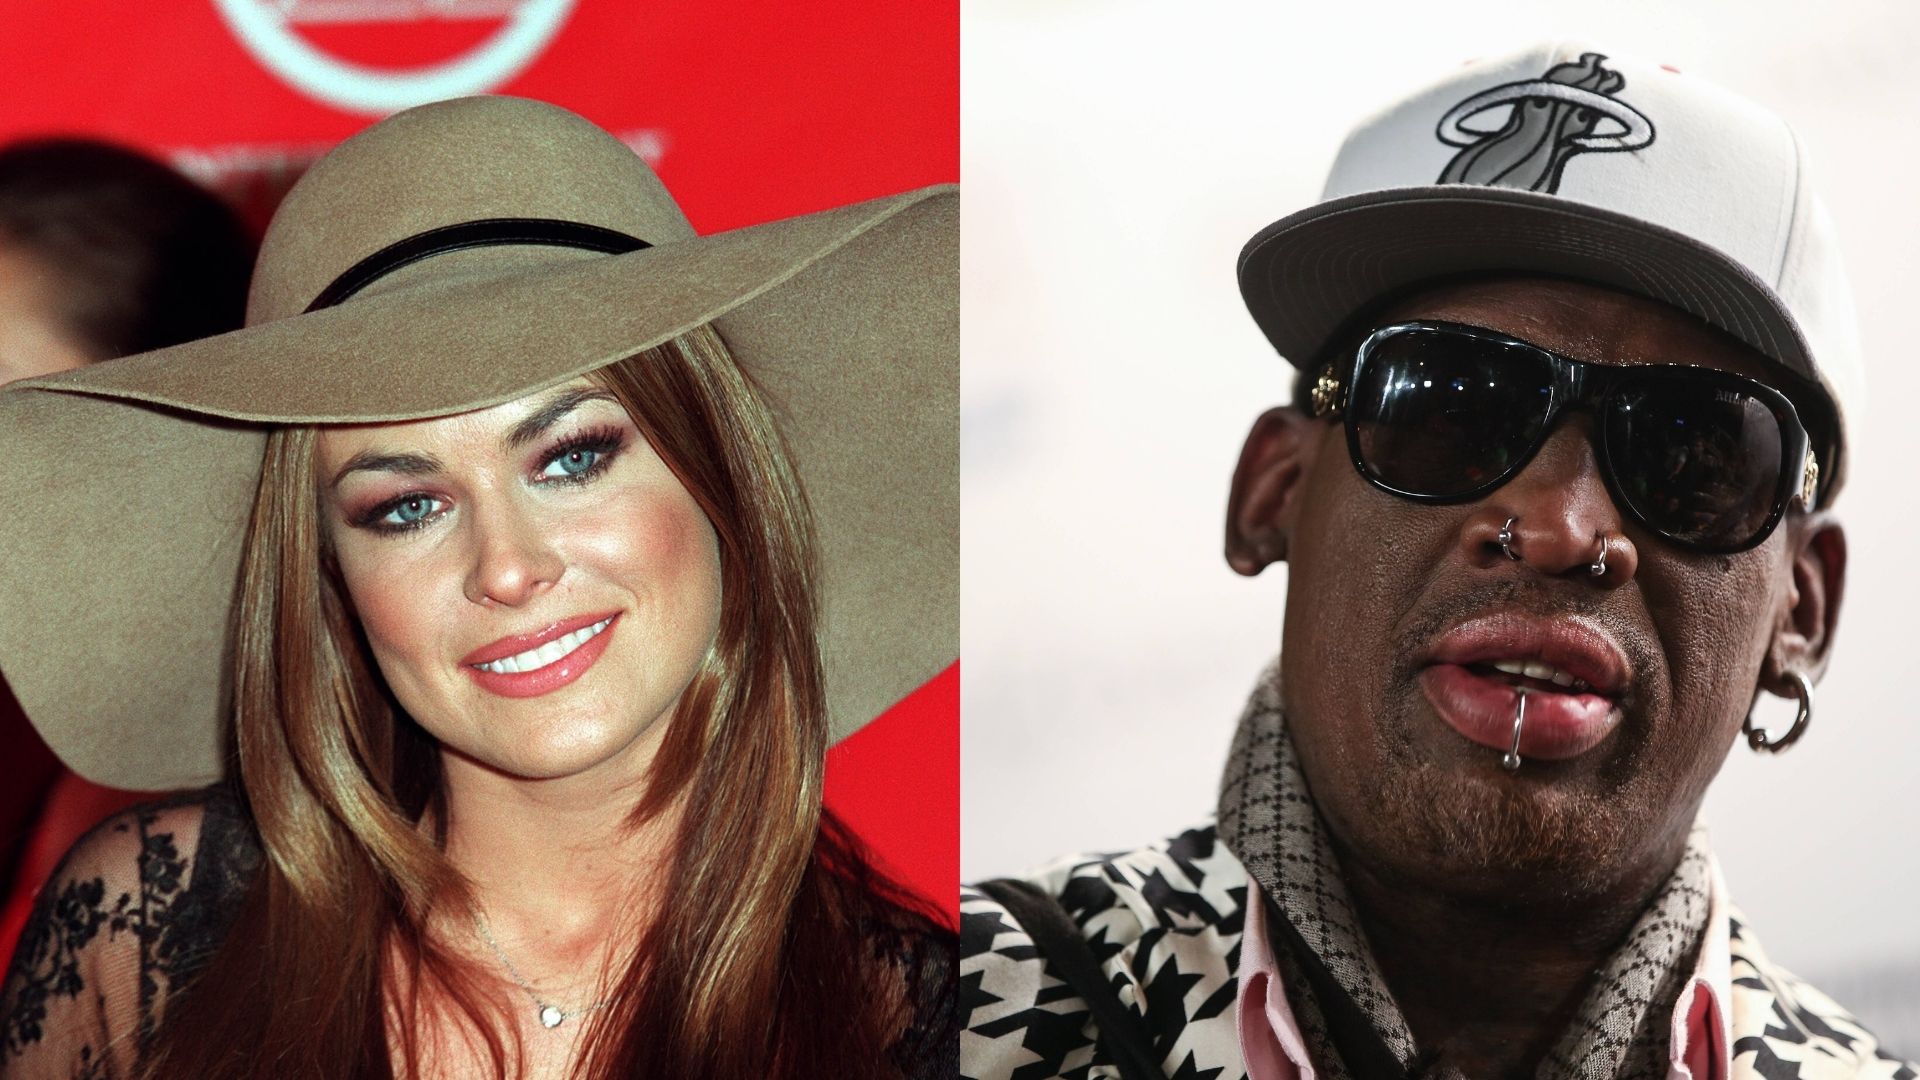 Dennis Rodman and Carmen Electra were in a relationship for a long time